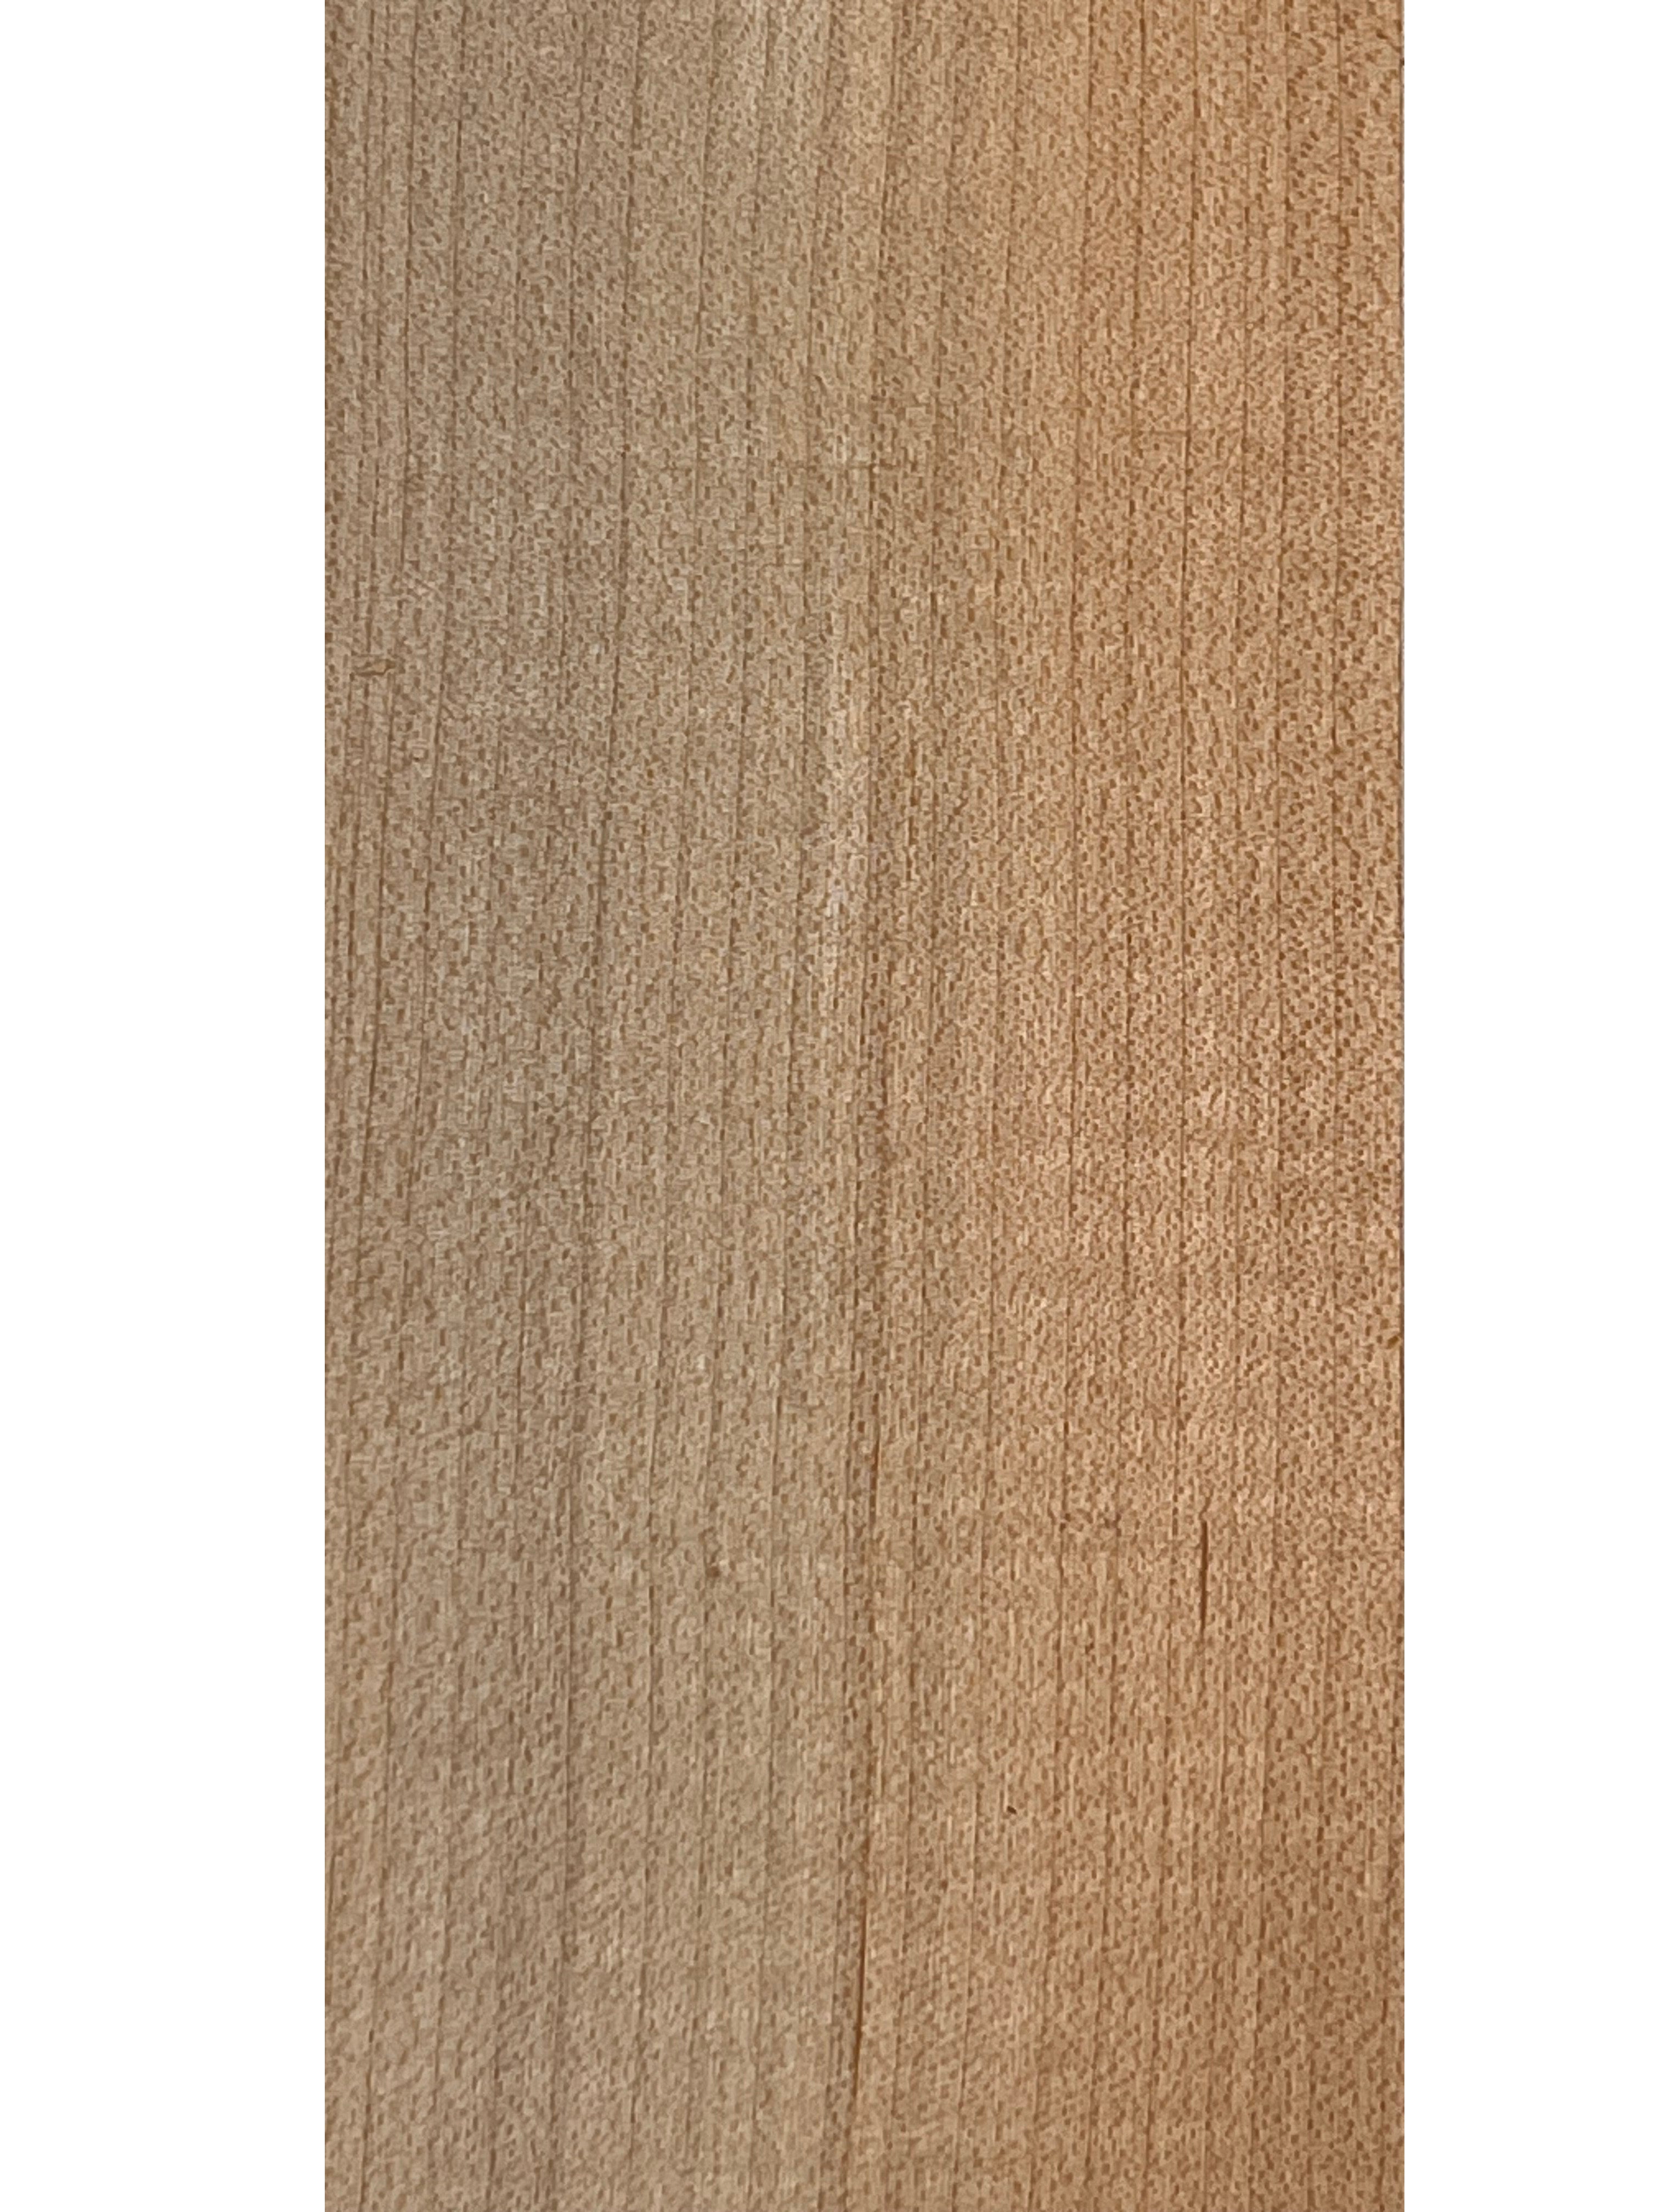 Pack Of 4, Hard Maple Guitar Fingerboard Blanks 21&quot; x 2-3/4&quot; x 3/8&quot; - Exotic Wood Zone - Buy online Across USA 